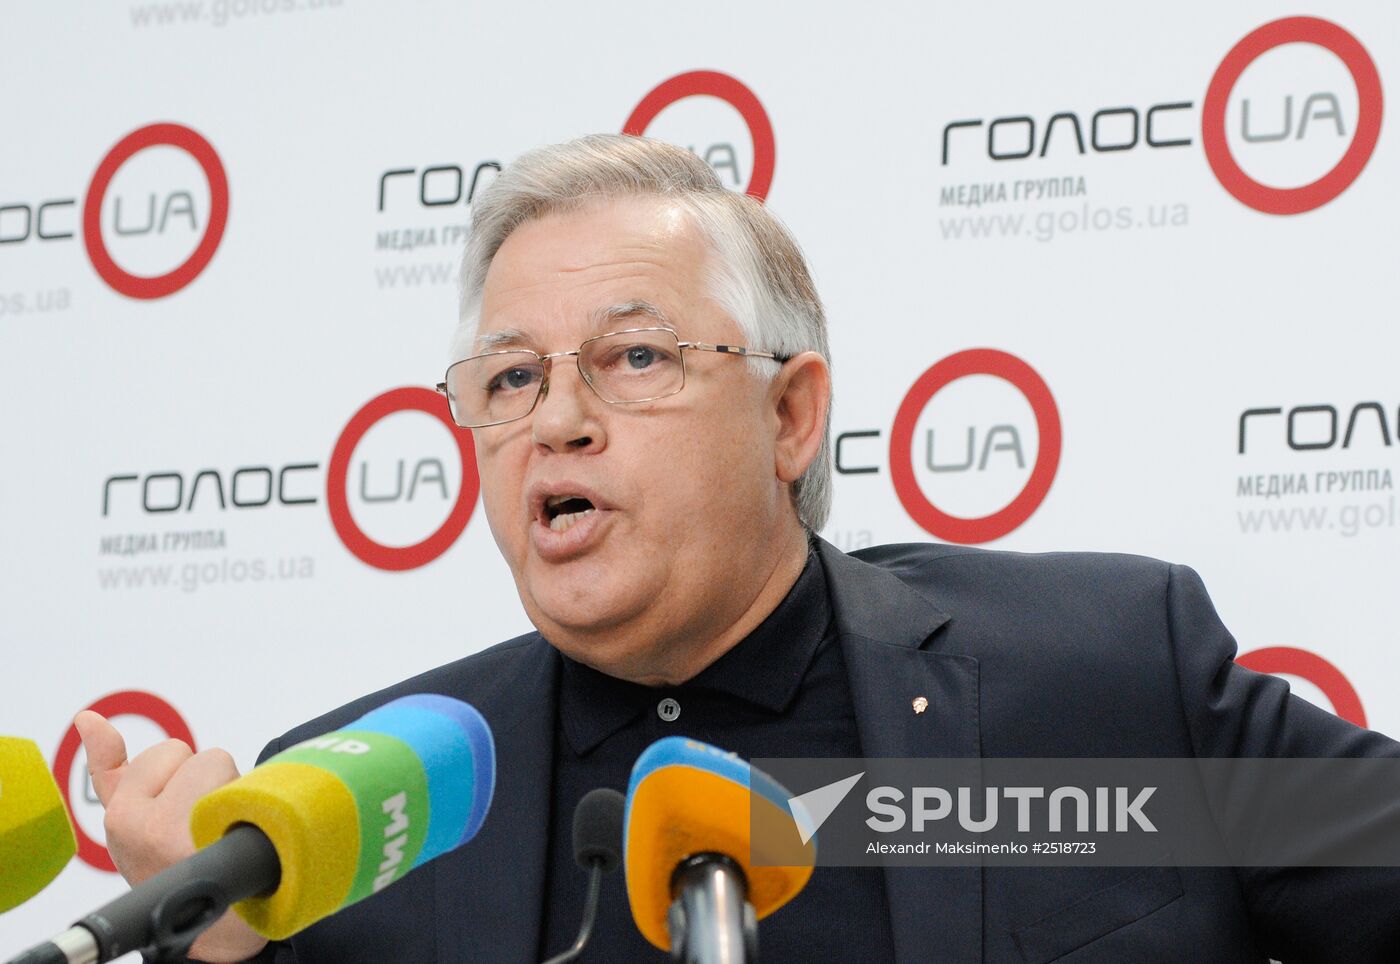 News conference by Petro Simonenko, leader of the Ukrainian Communist Party